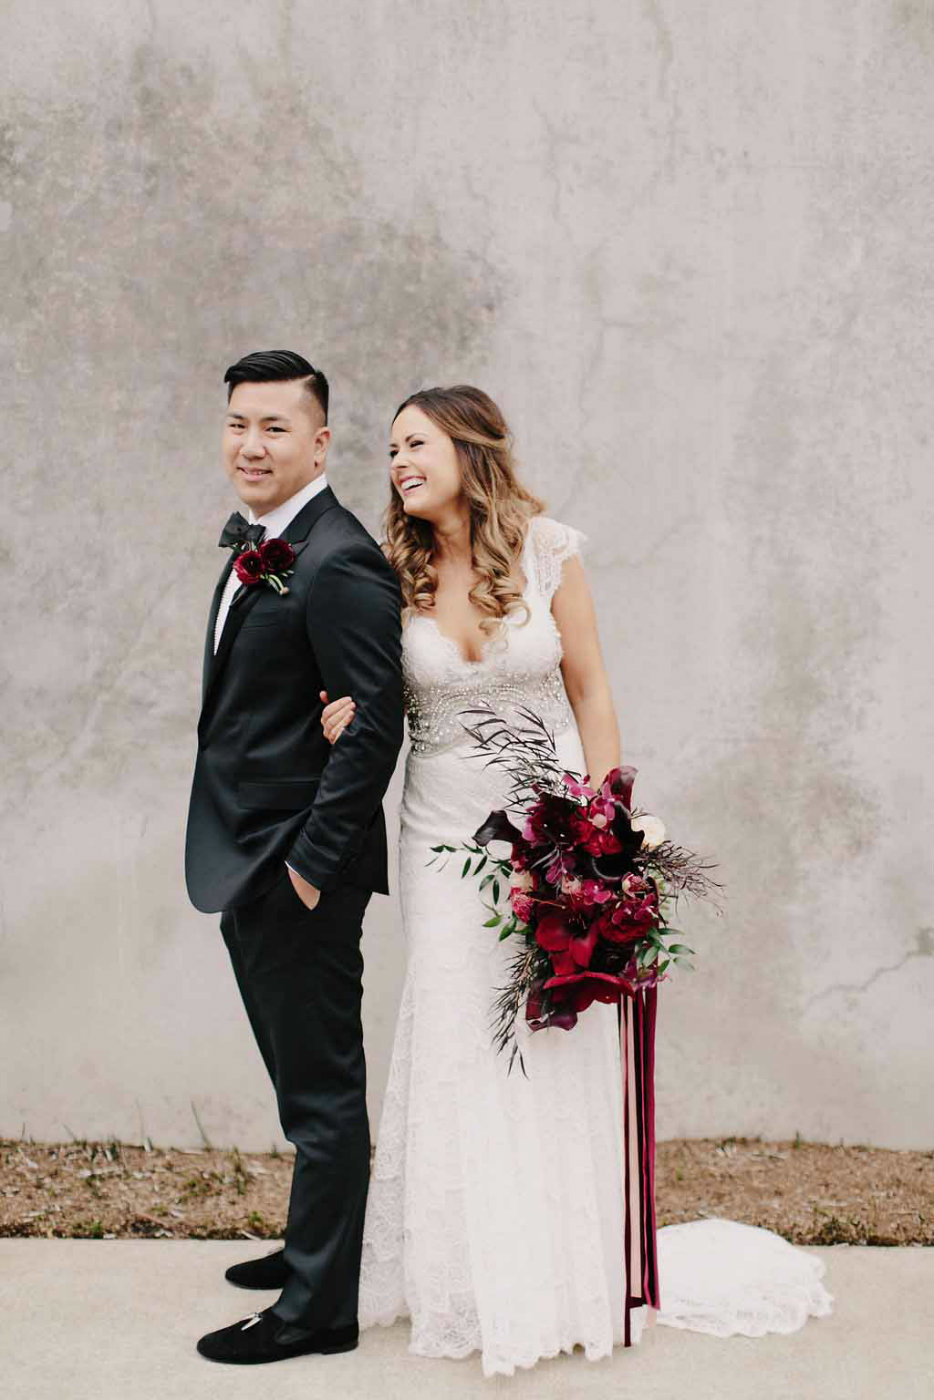 Unusual and dramatic wedding filled with moody romance designs by Flora Nova Seattle.